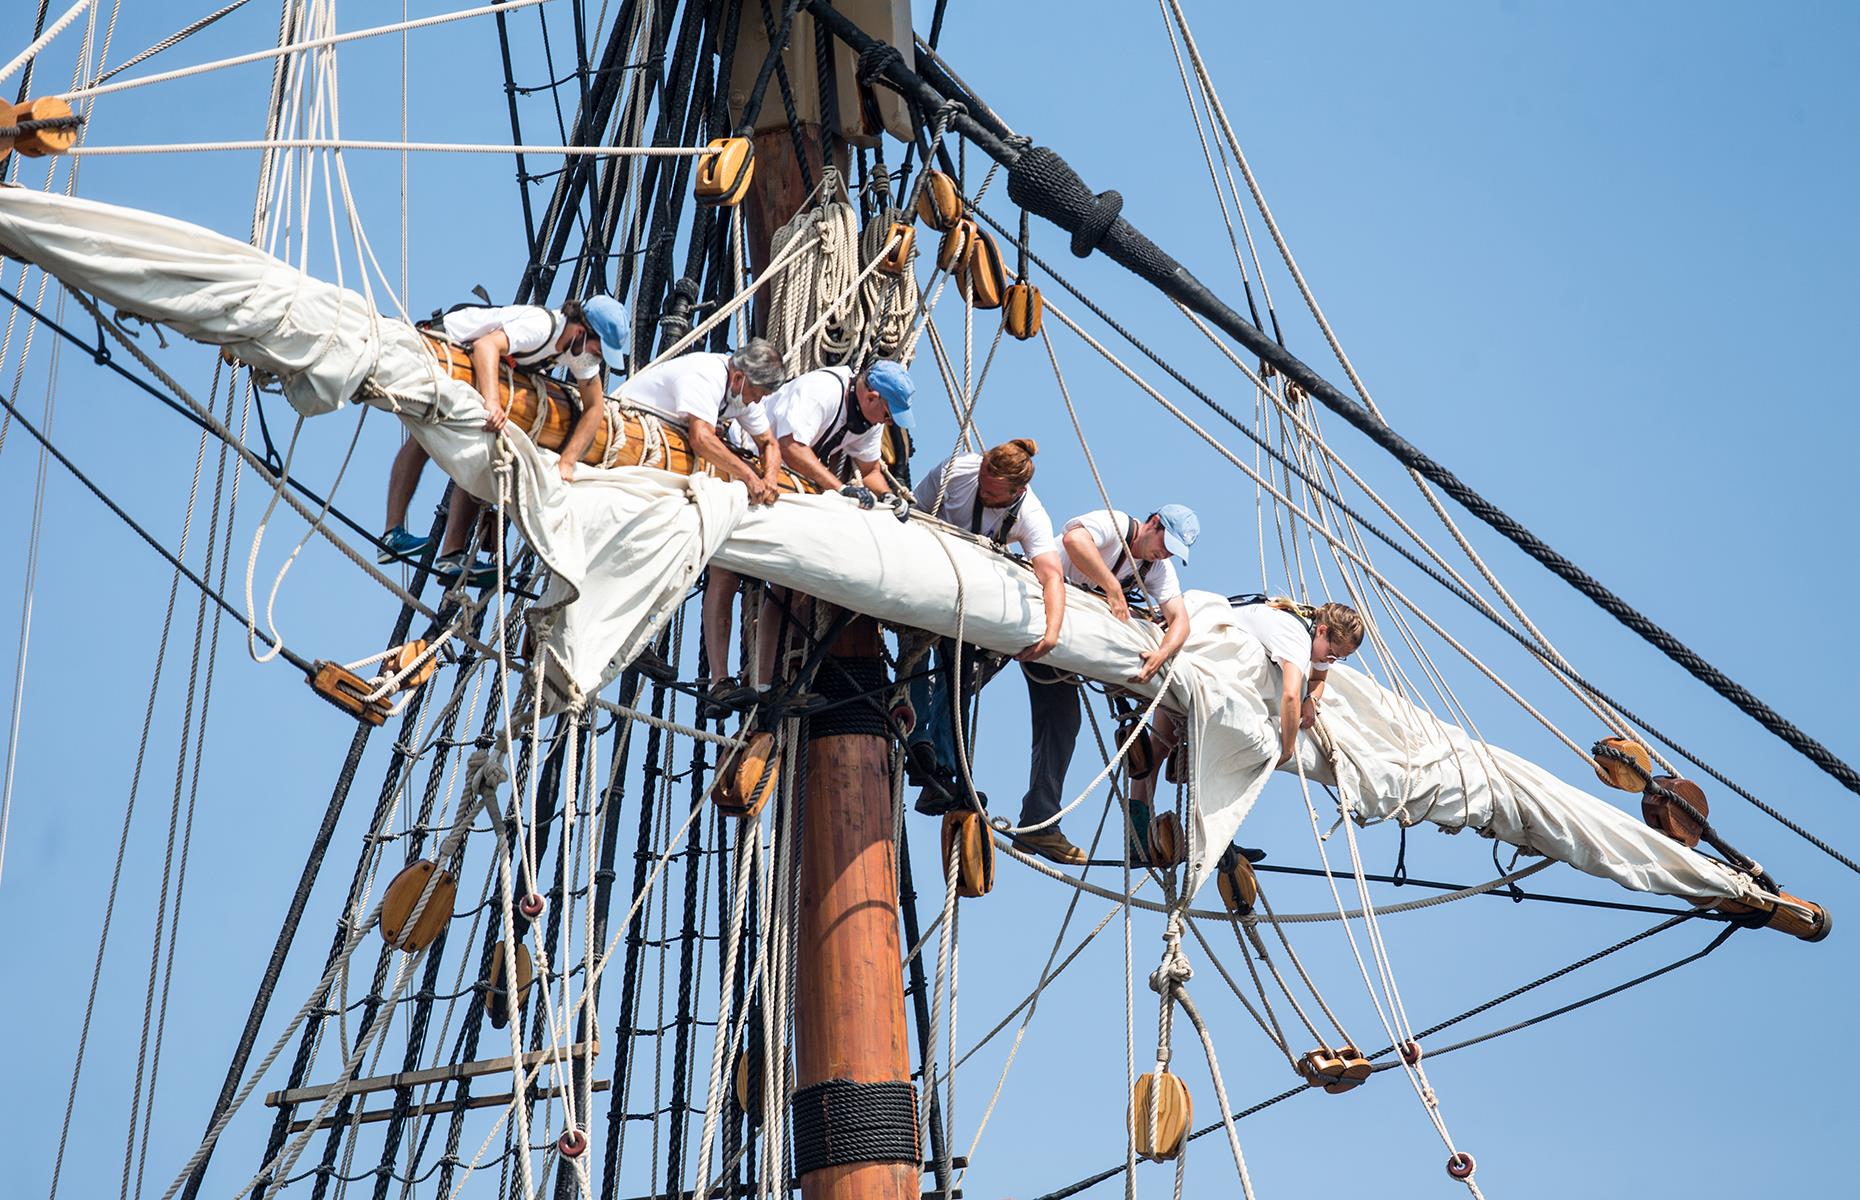 <p>The original vessel is long gone, likely sold off as scrap after her many voyages in the 1600s. Today, though, you can visit the Mayflower II – a full-scale replica of the tall ship built in Brixham, Devon, England and sailed across the ocean in 1957. The replica was fully restored for 2020 as part of the 400-year anniversary celebrations, and it's now one of the main attractions at the living history museum, <a href="https://www.plimoth.org/">Plimoth Plantation</a>. ​</p>  <p><strong><a href="https://www.loveexploring.com/galleries/102869/the-incredible-story-of-the-mayflower-the-ship-that-shaped-america">The incredible story of the Mayflower: the ship that shaped America</a></strong></p>